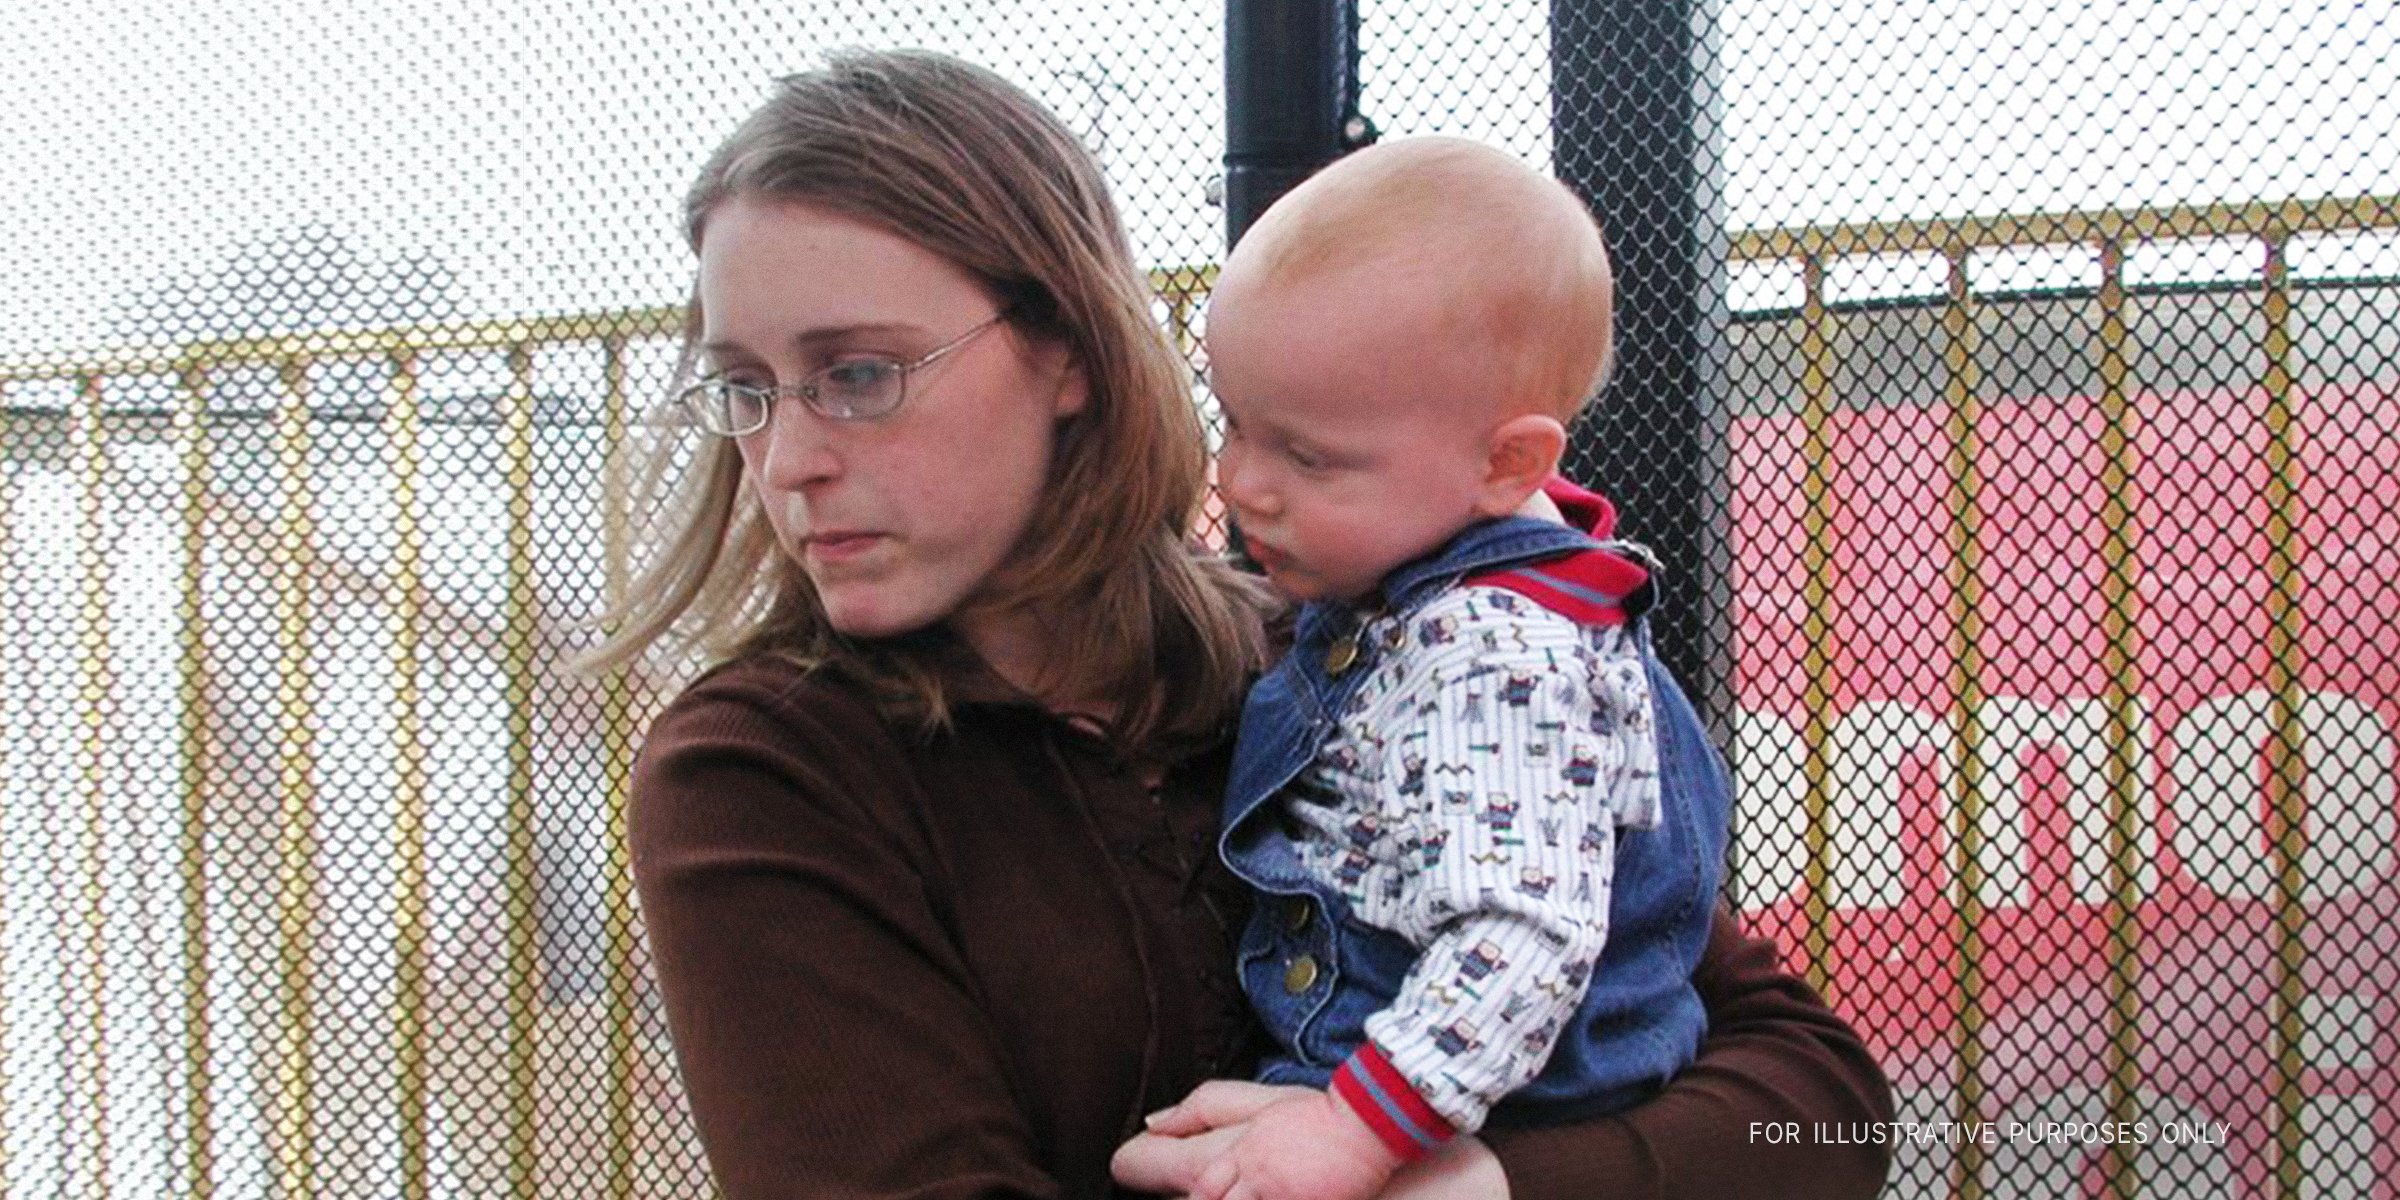 Woman Carrying Her Child In Arms. | Source: Flickr/subewl (CC BY-SA 2.0)